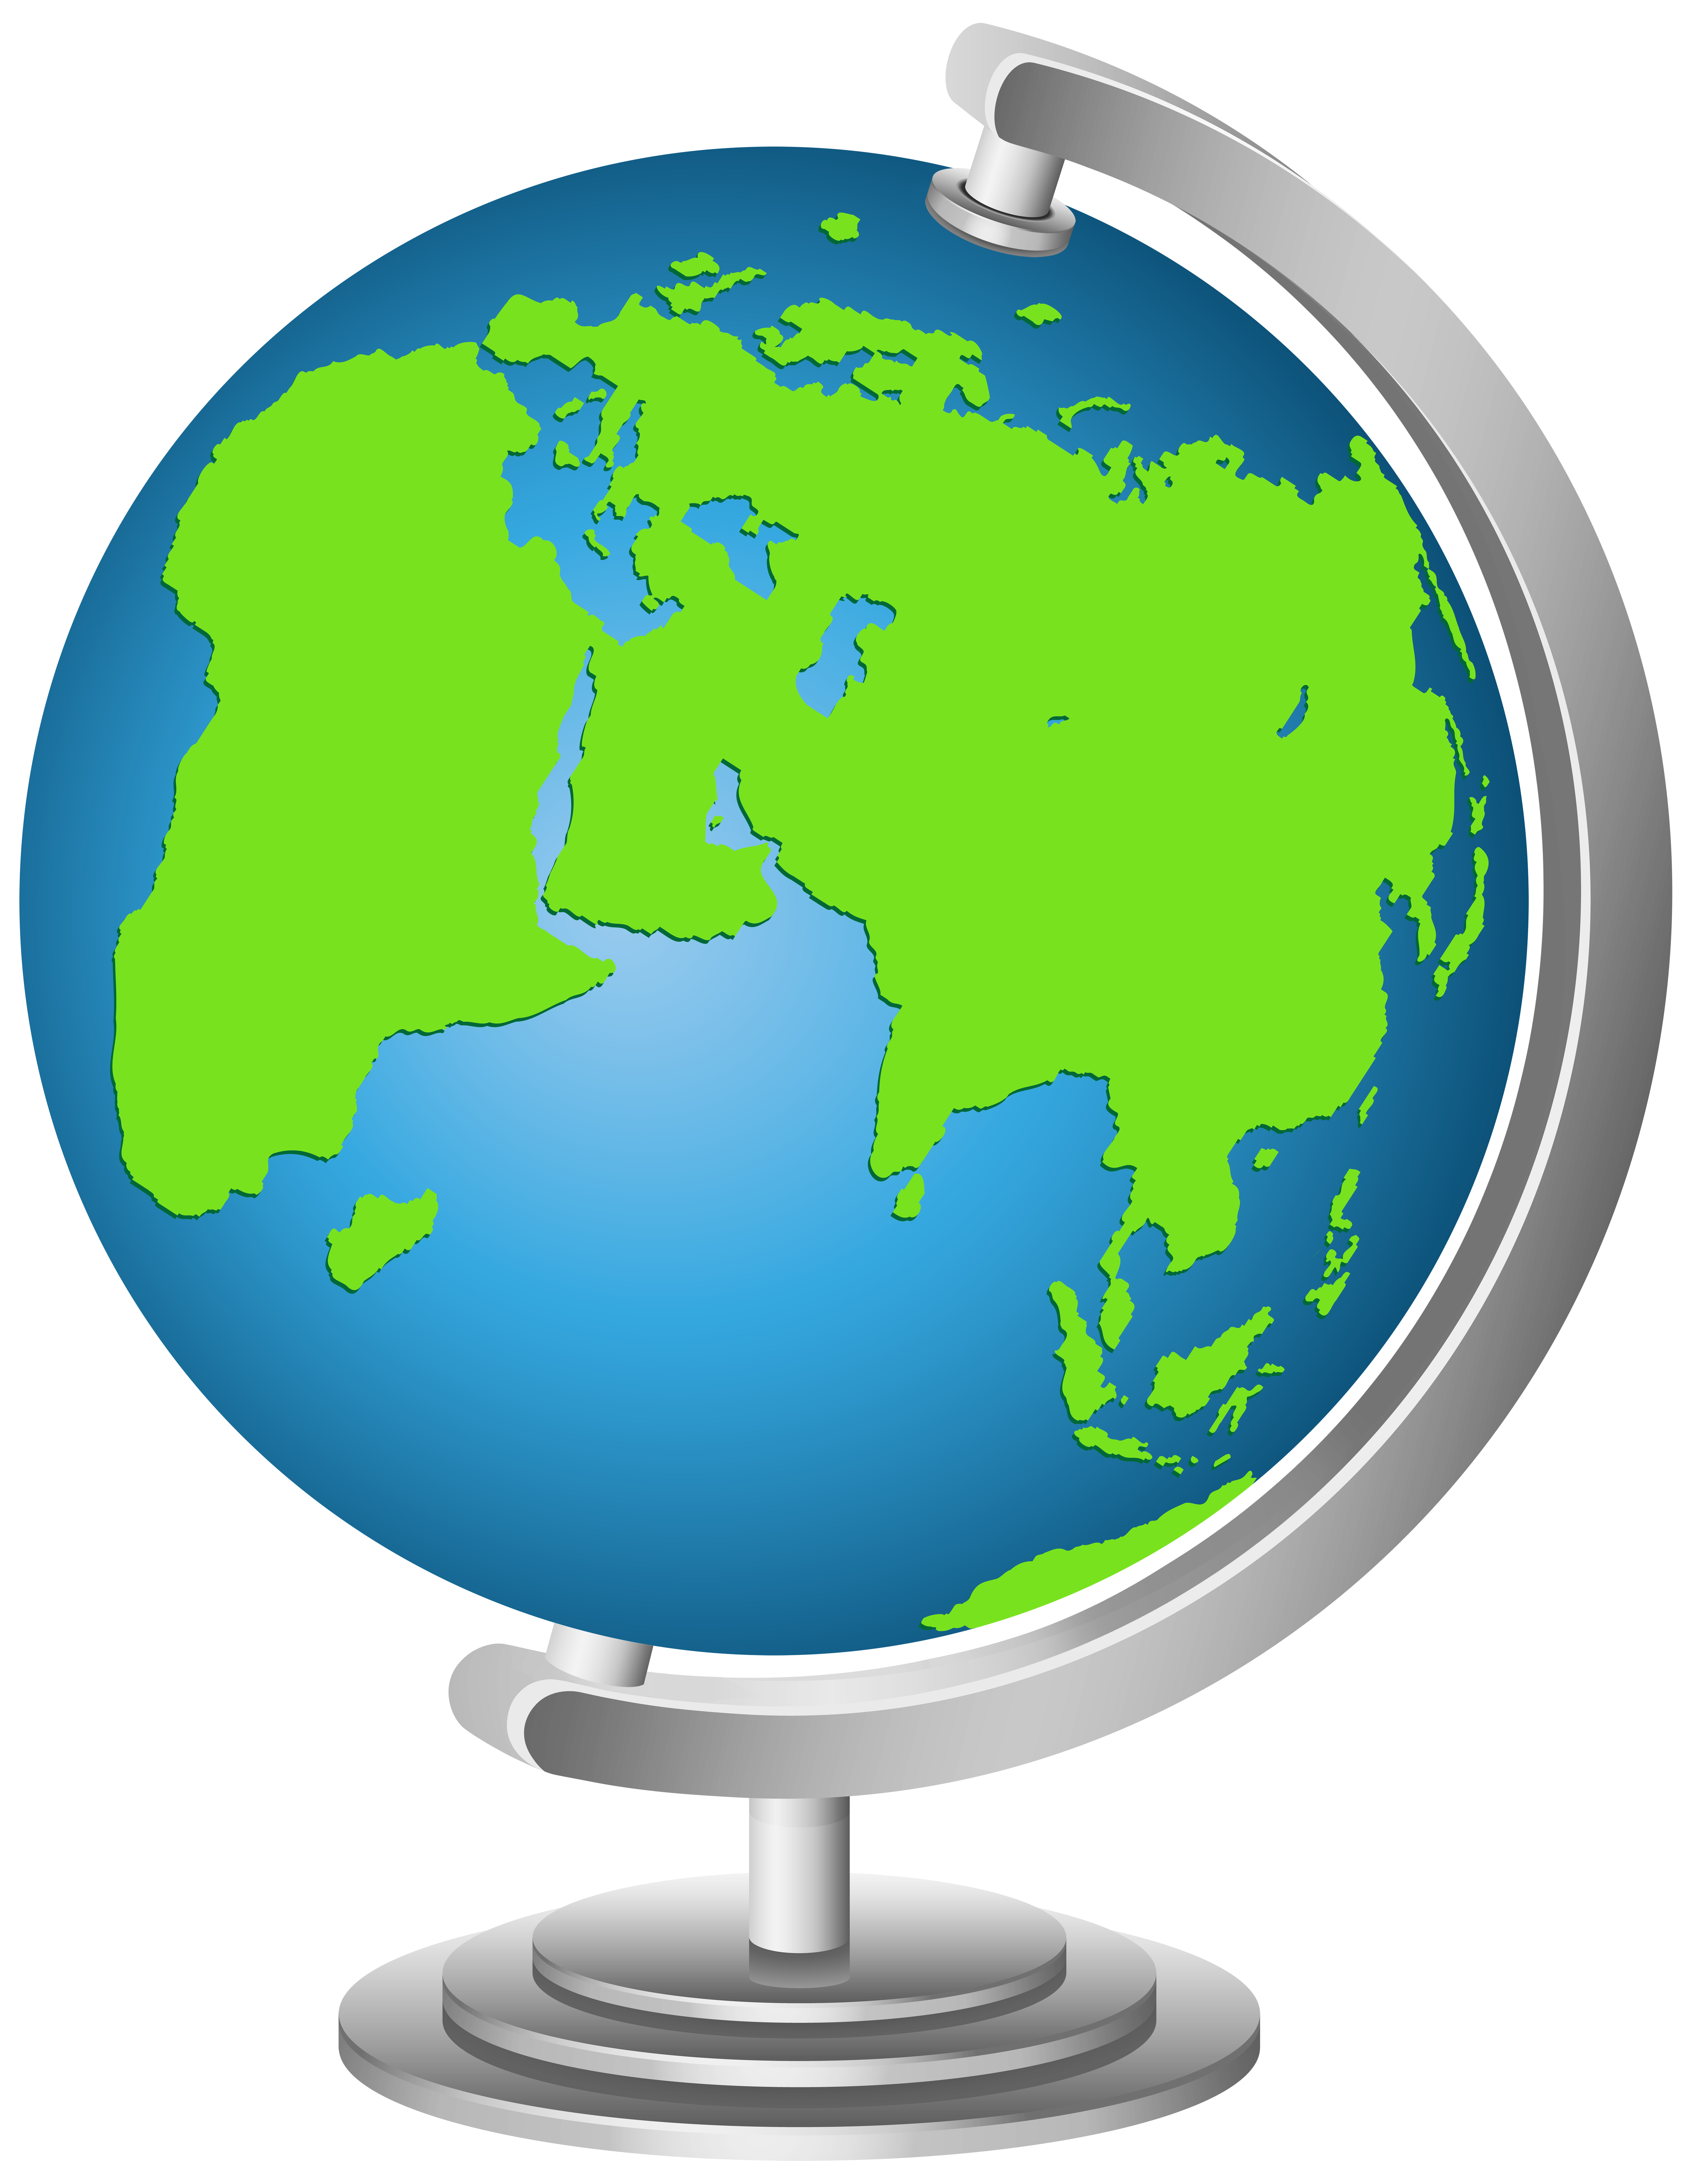 World Globe PNG Transparent Clipart​ | Gallery Yopriceville - High-Quality  Free Images and Transparent PNG Clipart